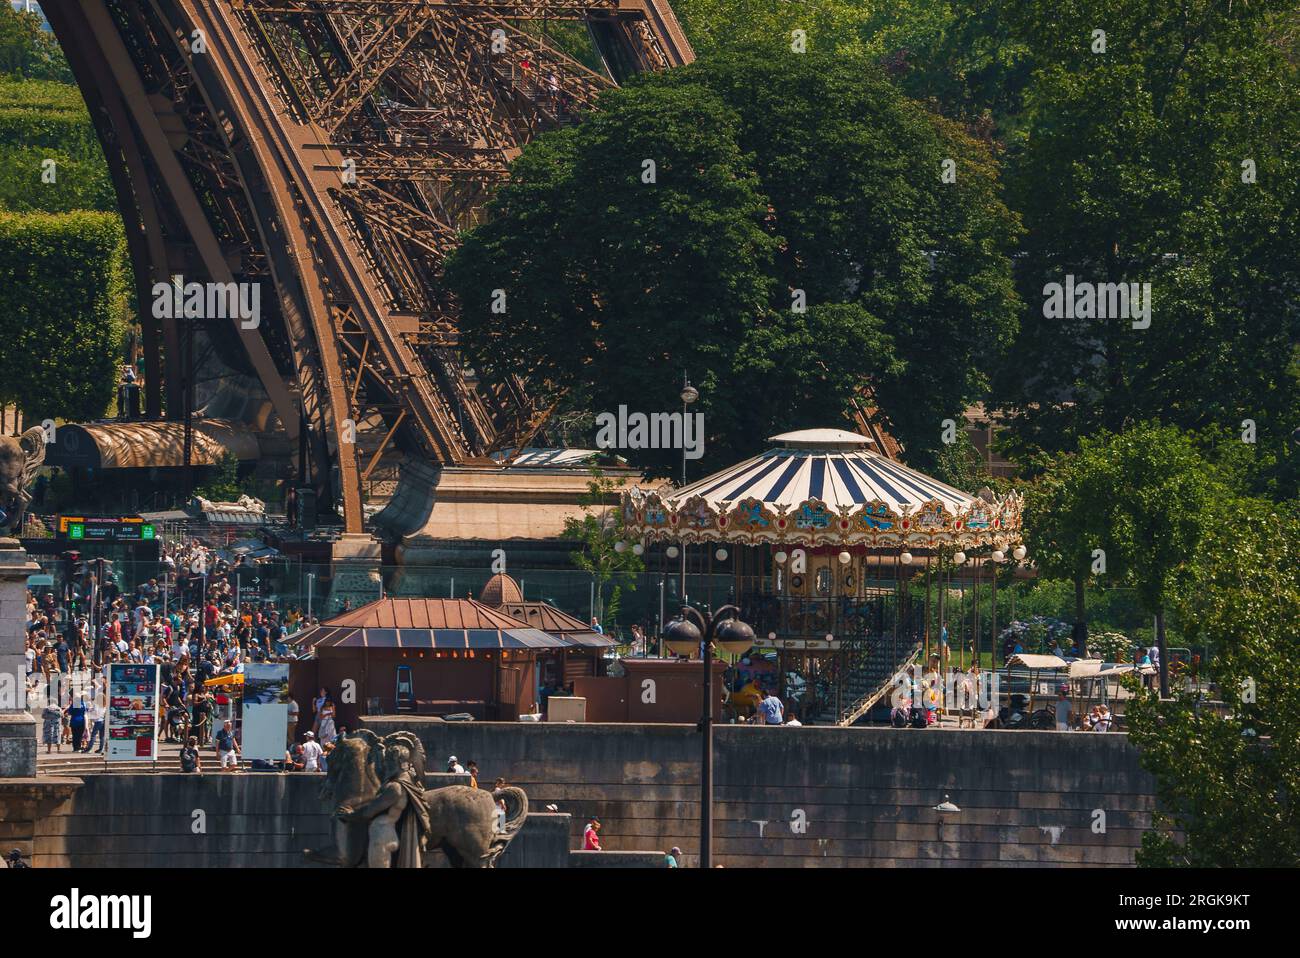 Sunny Summer Day at the Eiffel Tower Stock Photo